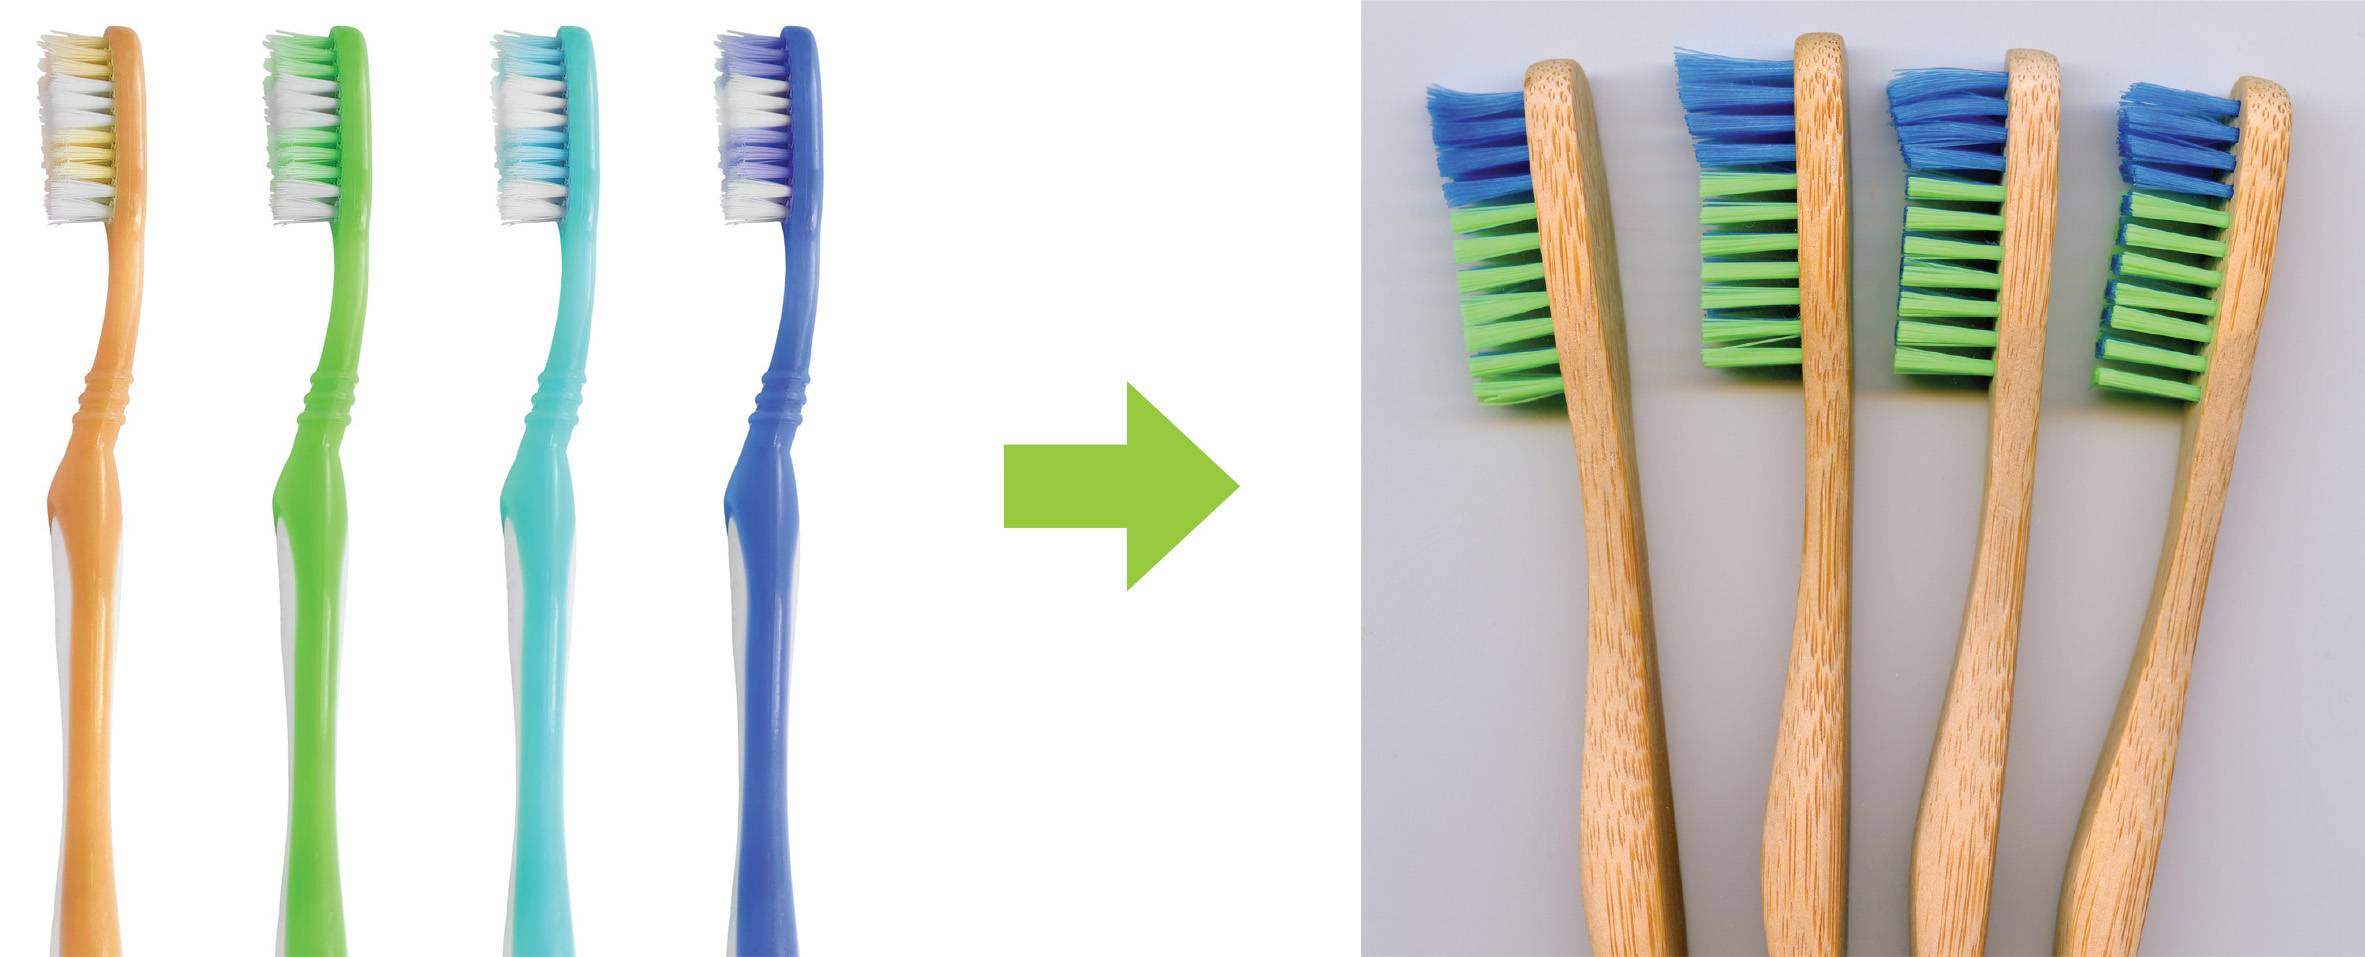 disposable plastic - toothbrushes